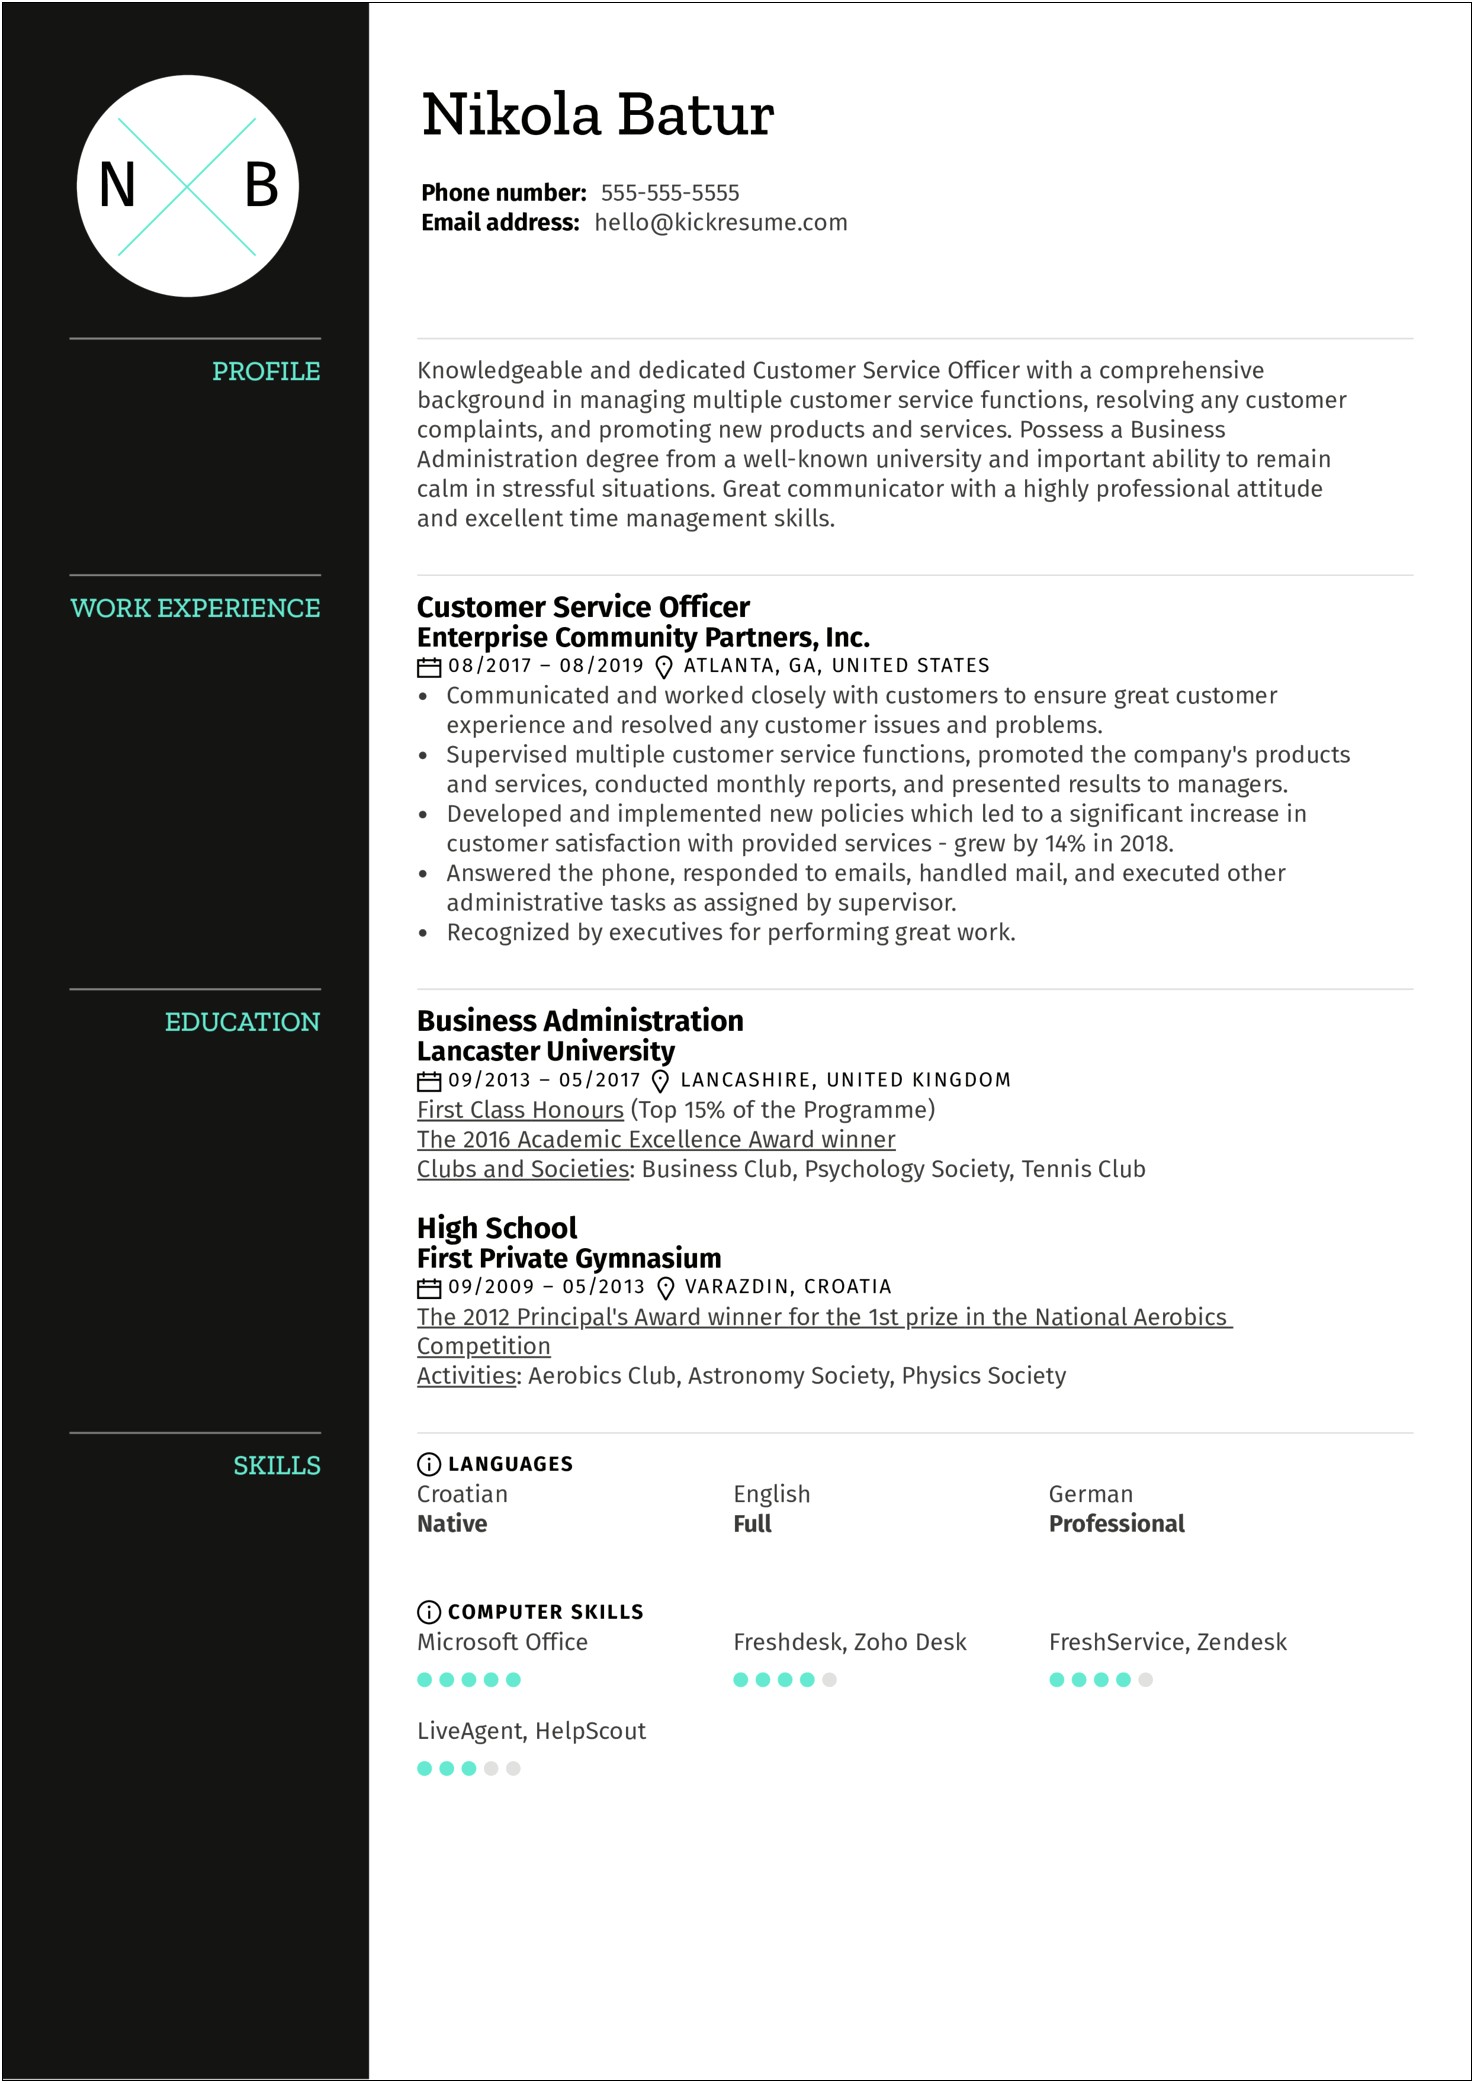 Customer Service Qualifications For Resume Examples